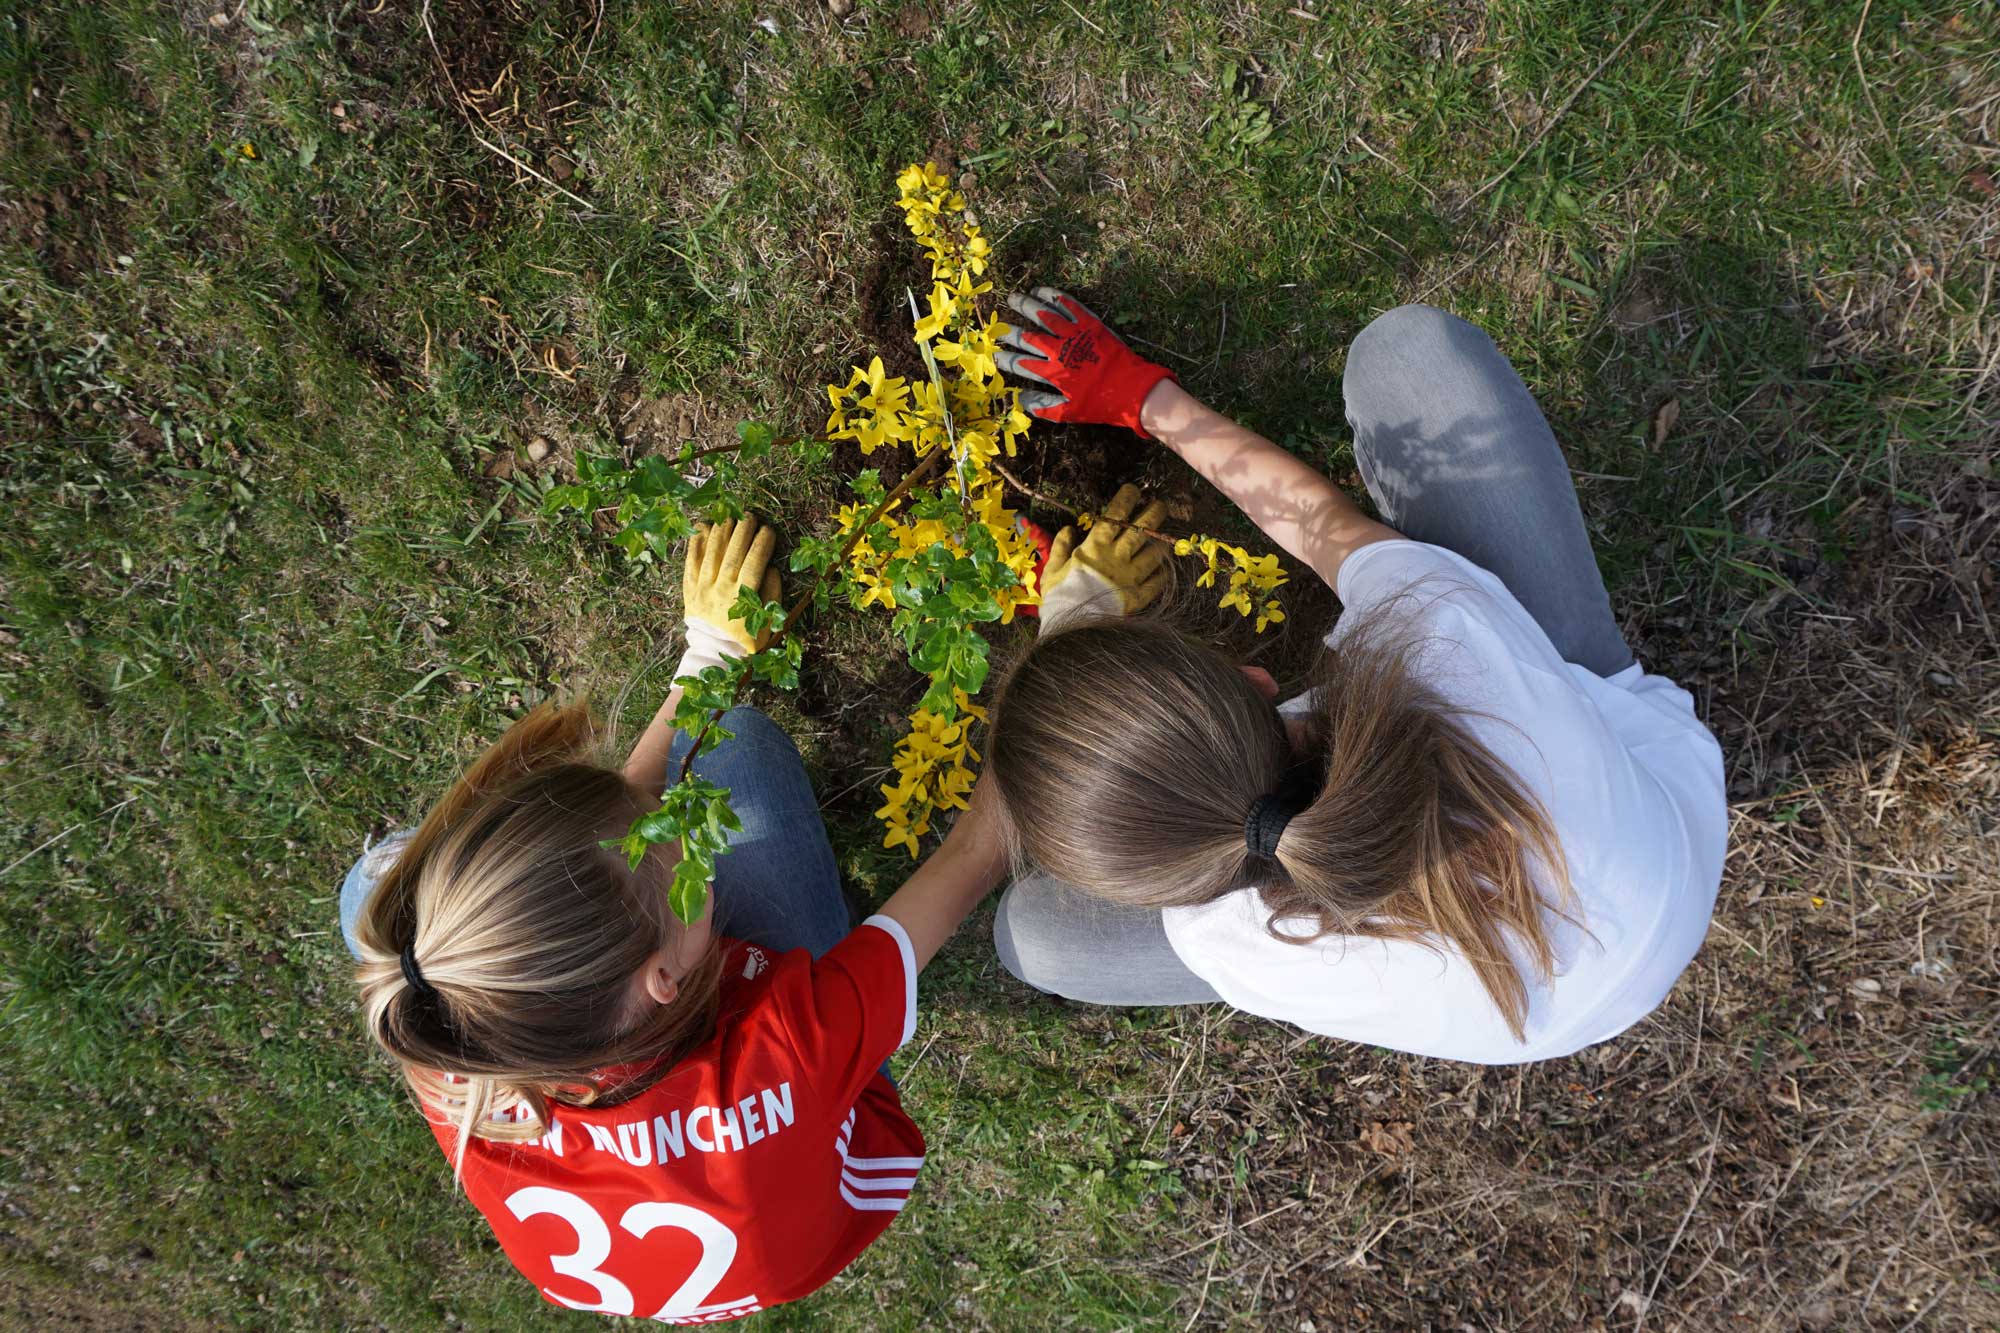 A bird's eye view photo shows a student wearing red gardening gloves planting a forsythia.